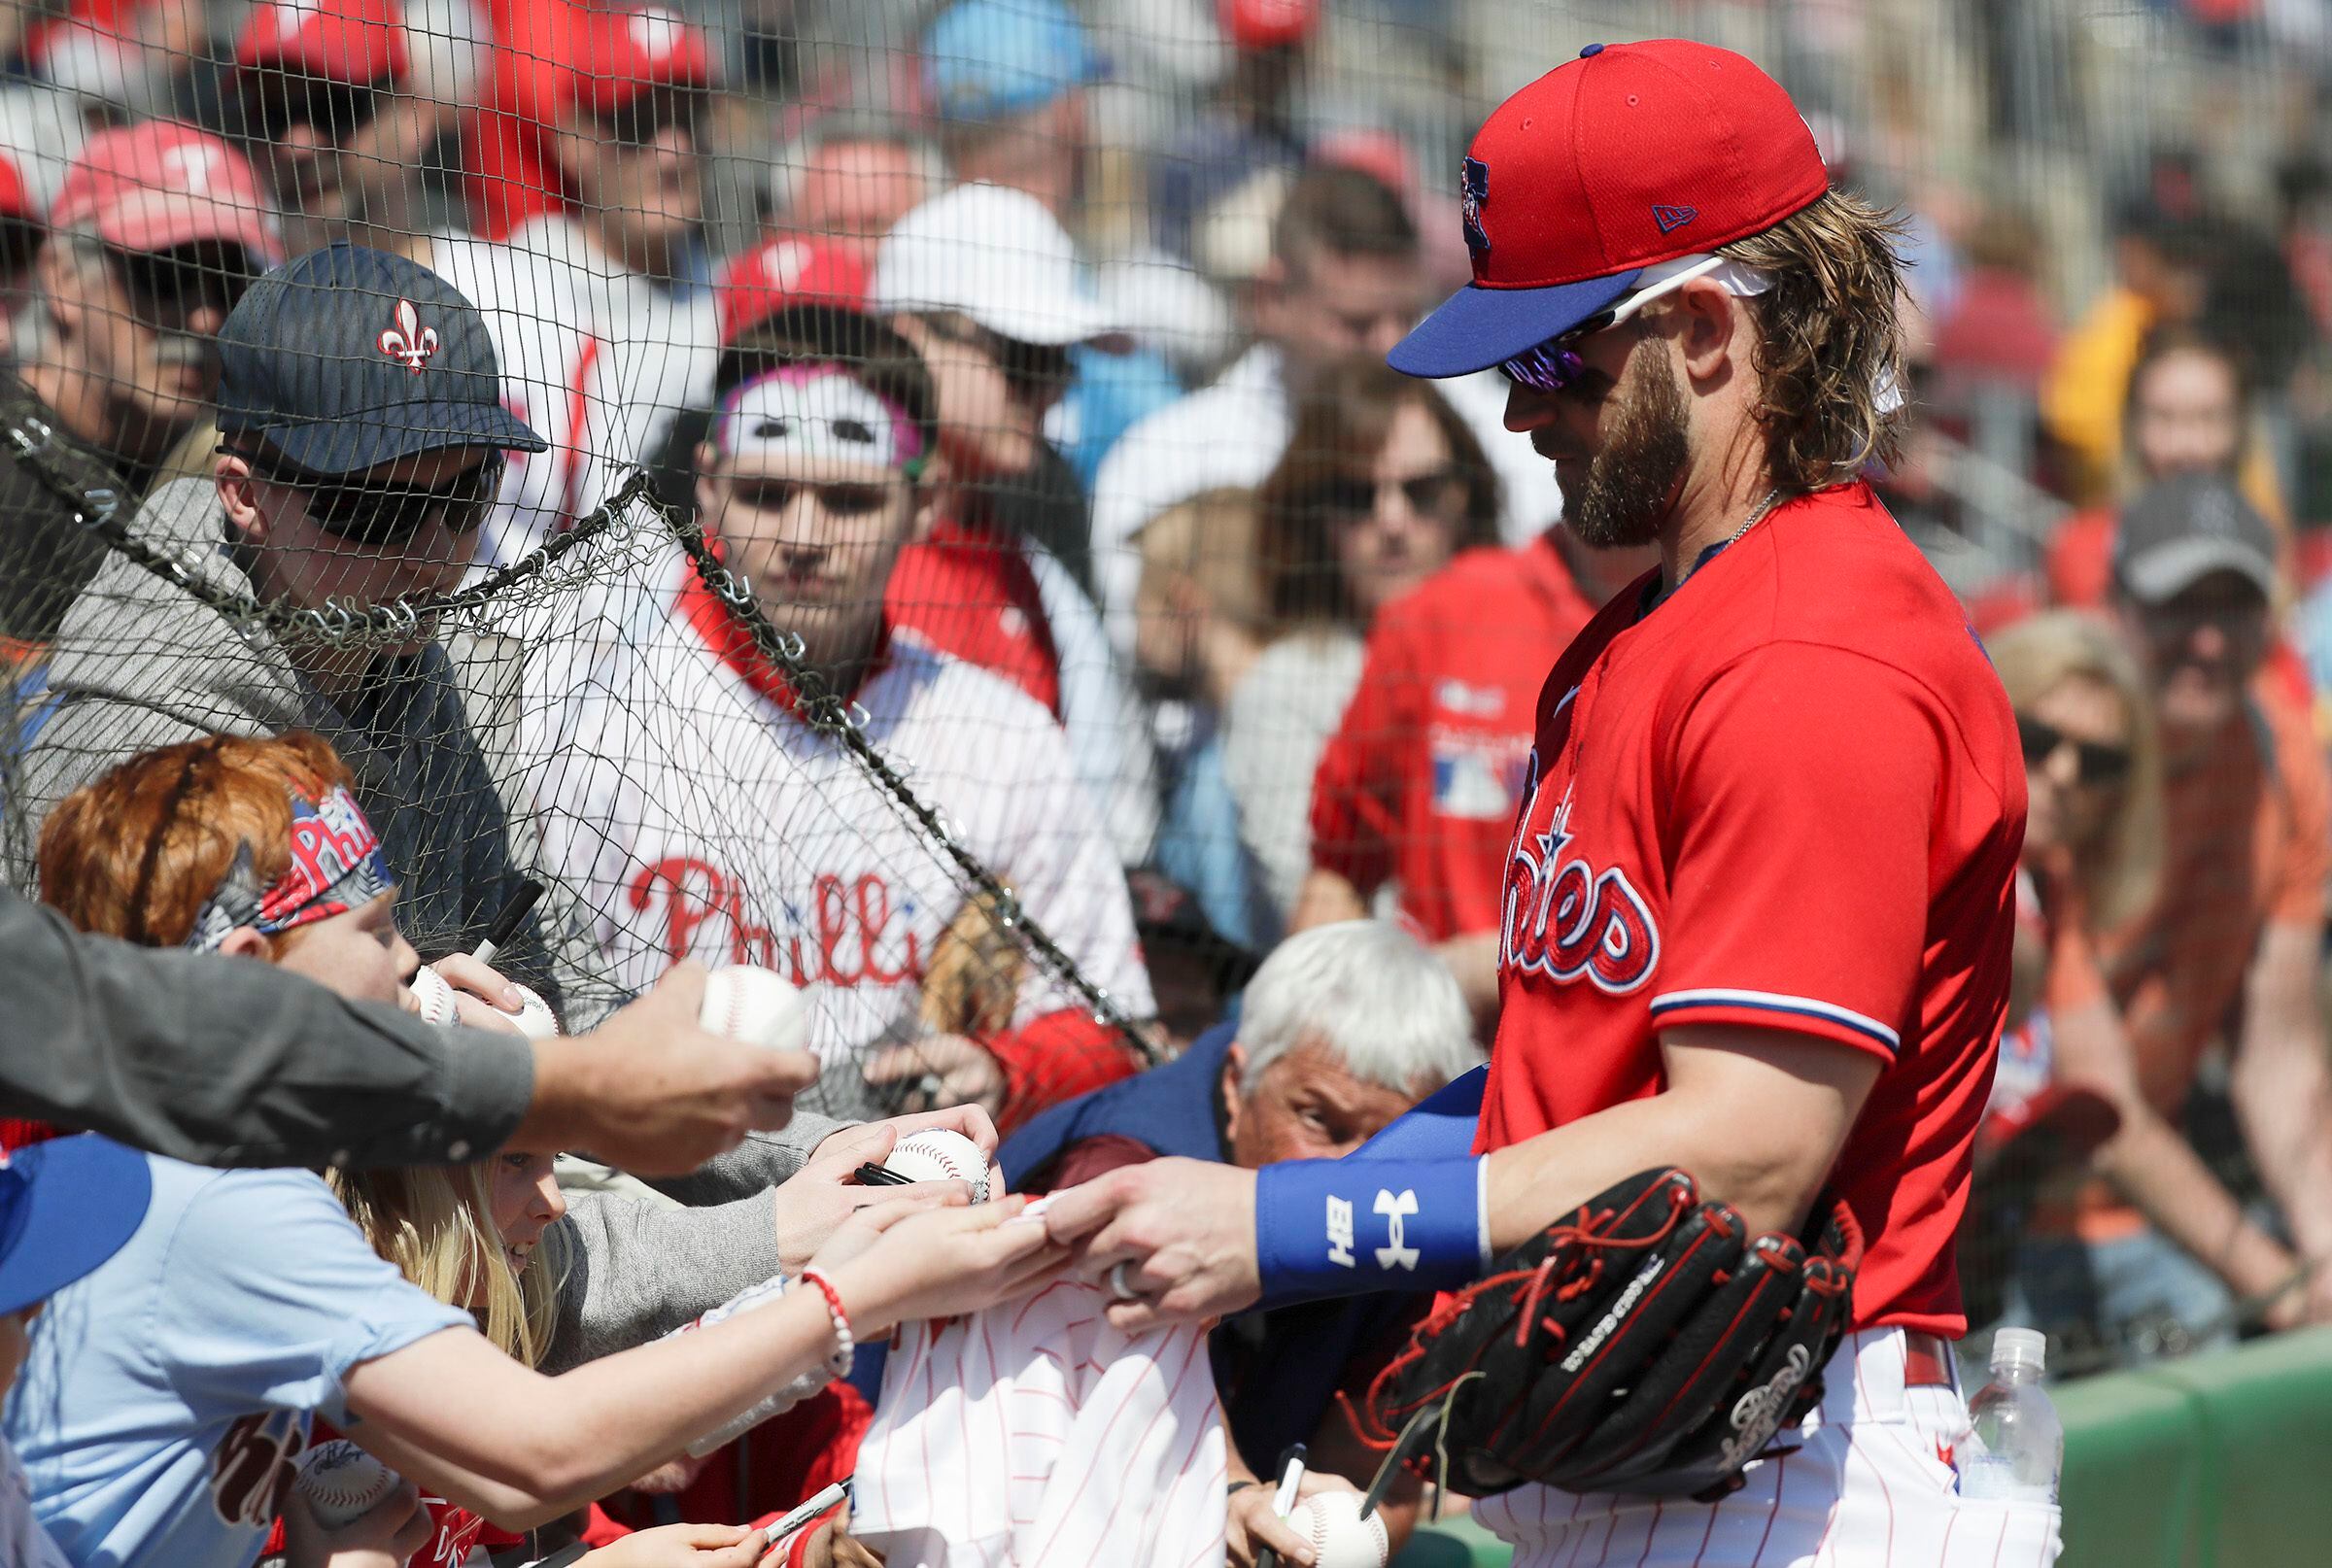 Coronavirus: Why MLB is advising players not to sign autographs